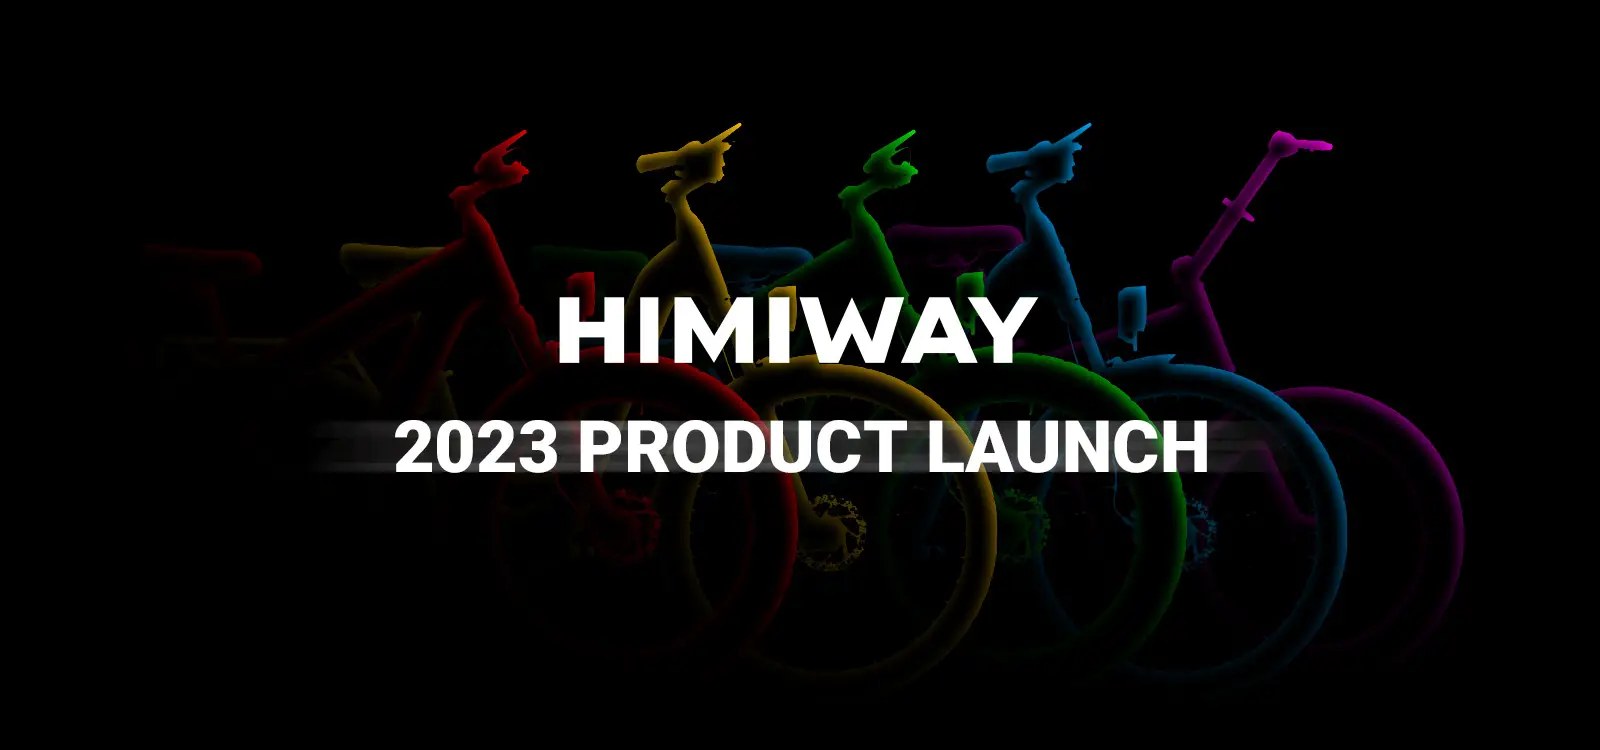 Himiway Launches New Mission and Products to Revolutionize E-Bike Transportation 4